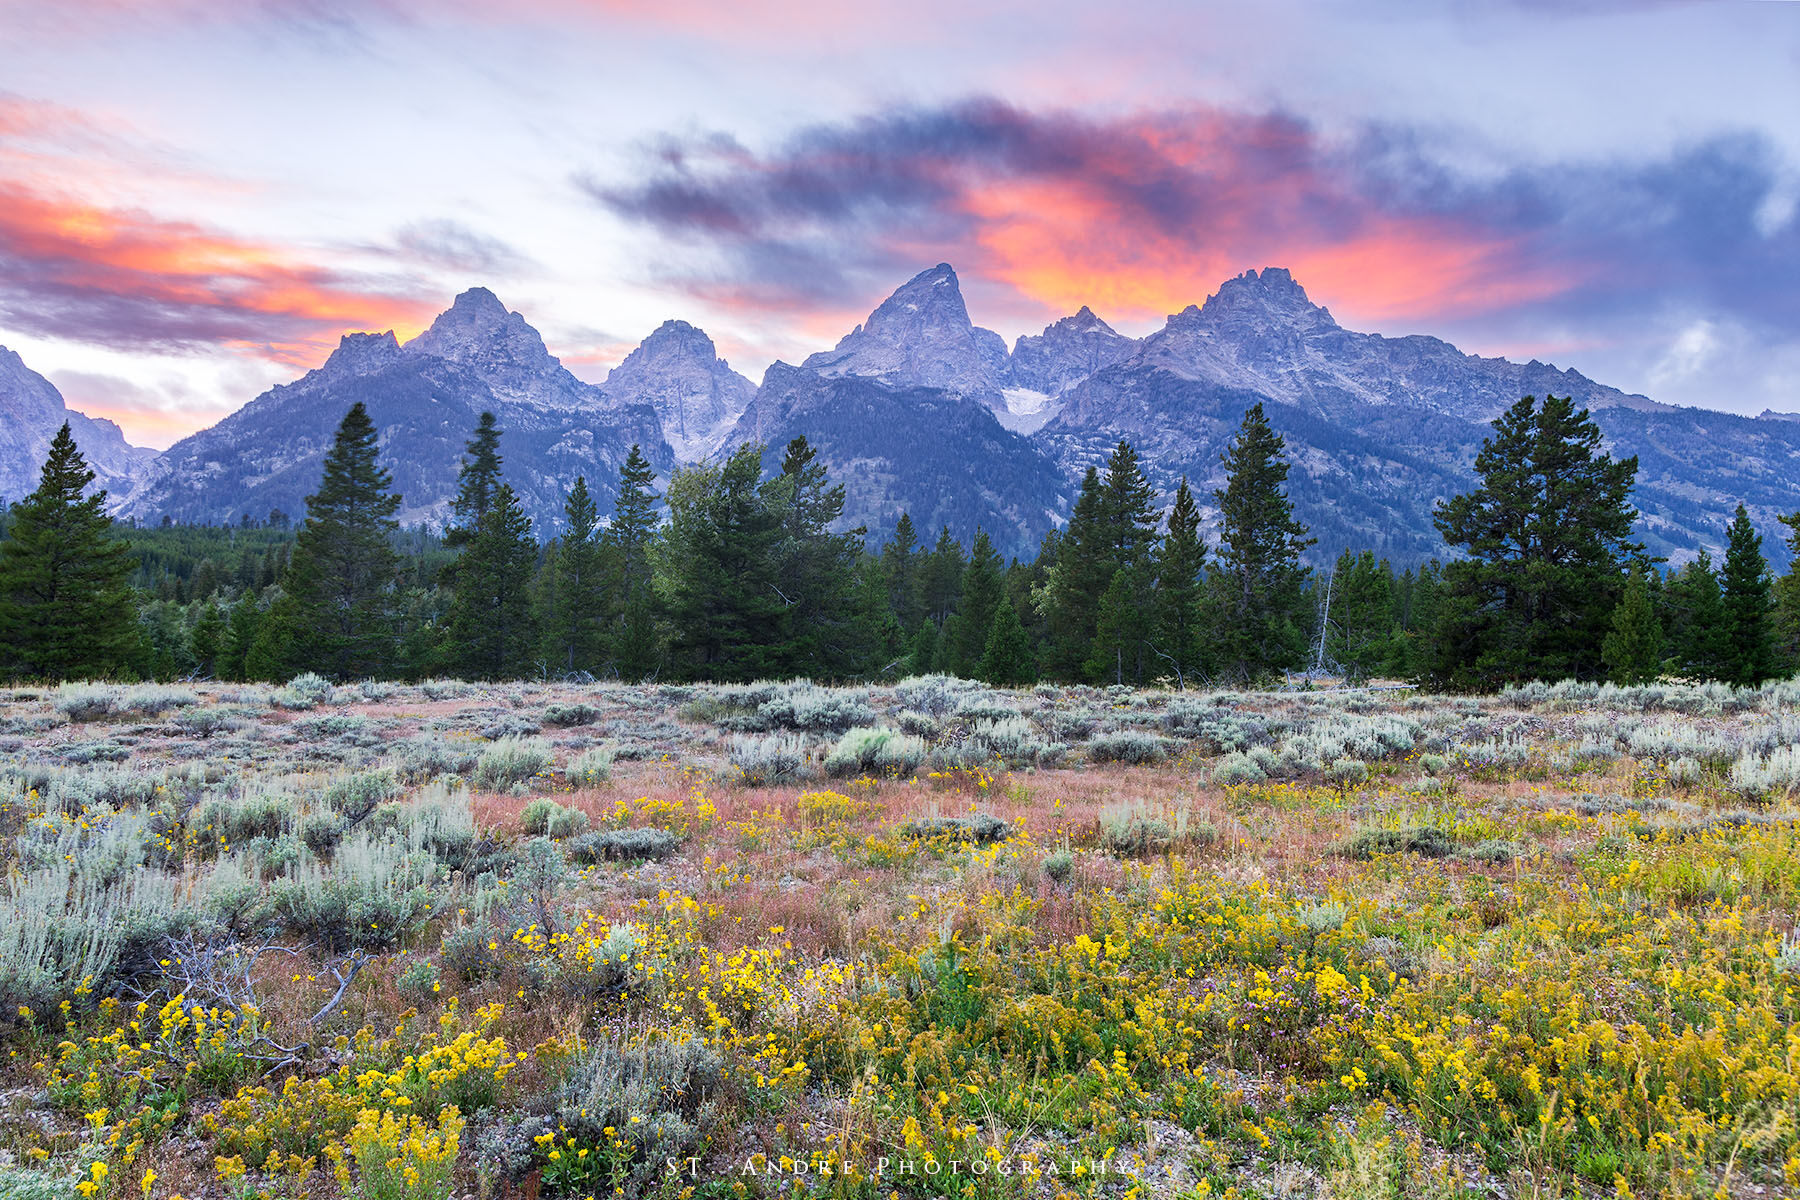 The Grand Teton Mountain range has a series of small clouds lit up with reds at sunset. the meadow in the foreground is covered with wildflowers. 